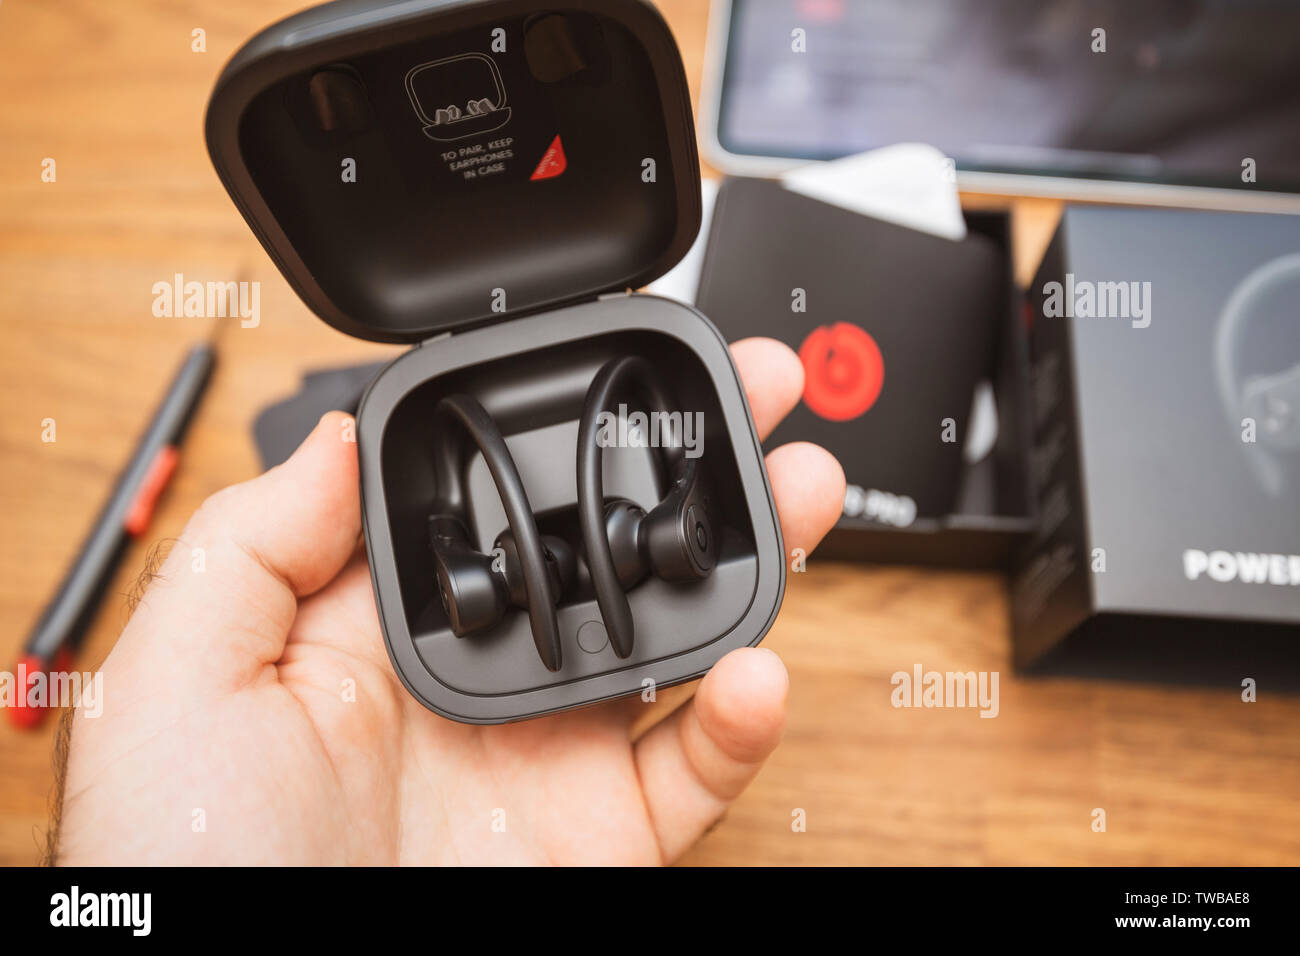 Paris, France - Jun 17, 2019: Man hand admiring the Powerbeats Pro Beats by Dr Dre wireless high-performance earphones waterproof and workout professional headphones in their charging case - unboxing Stock Photo